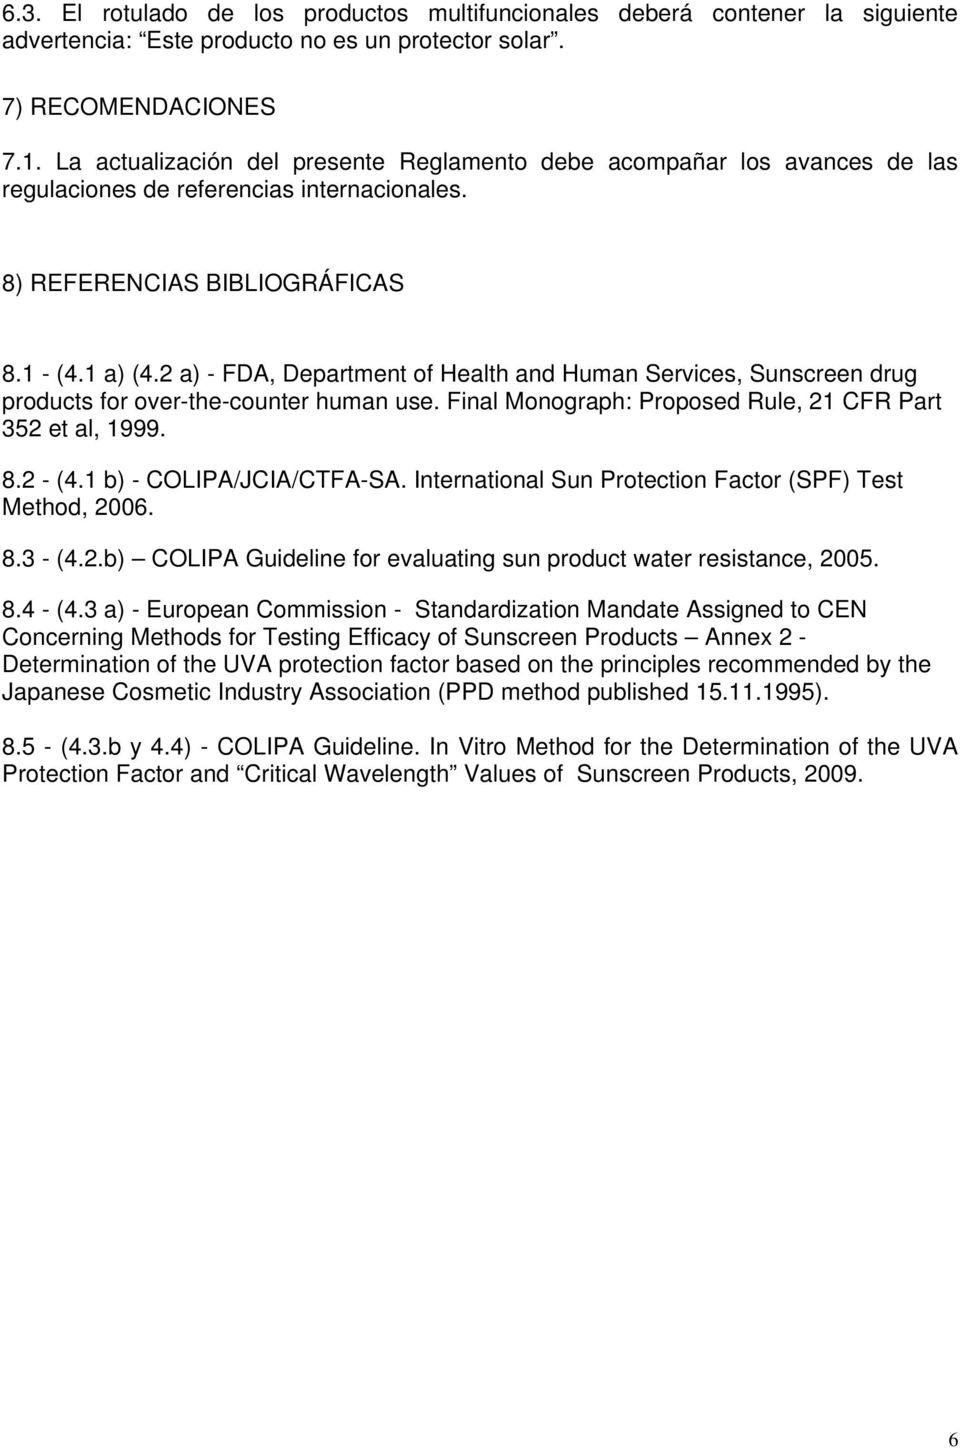 2 a) - FDA, Department of Health and Human Services, Sunscreen drug products for over-the-counter human use. Final Monograph: Proposed Rule, 21 CFR Part 352 et al, 1999. 8.2 - (4.